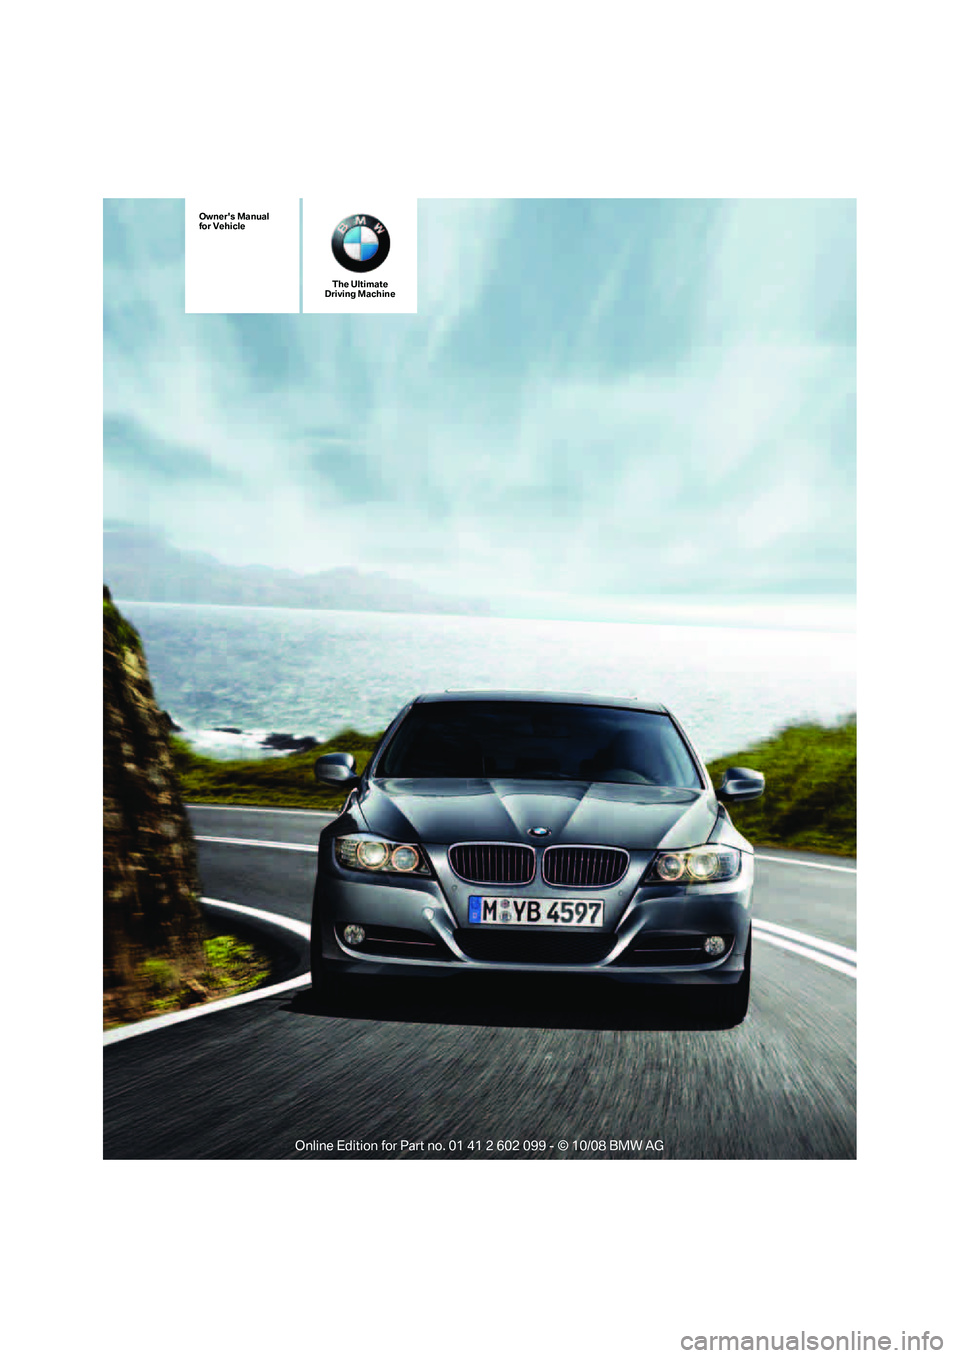 BMW 328I 2009  Owners Manual The Ultimate
Driving Machine
Owners Manual
for Vehicle
ba8_E9091_cic.book  Seite 1  Mittwoch, 29. Oktober 2008  2:59 14 